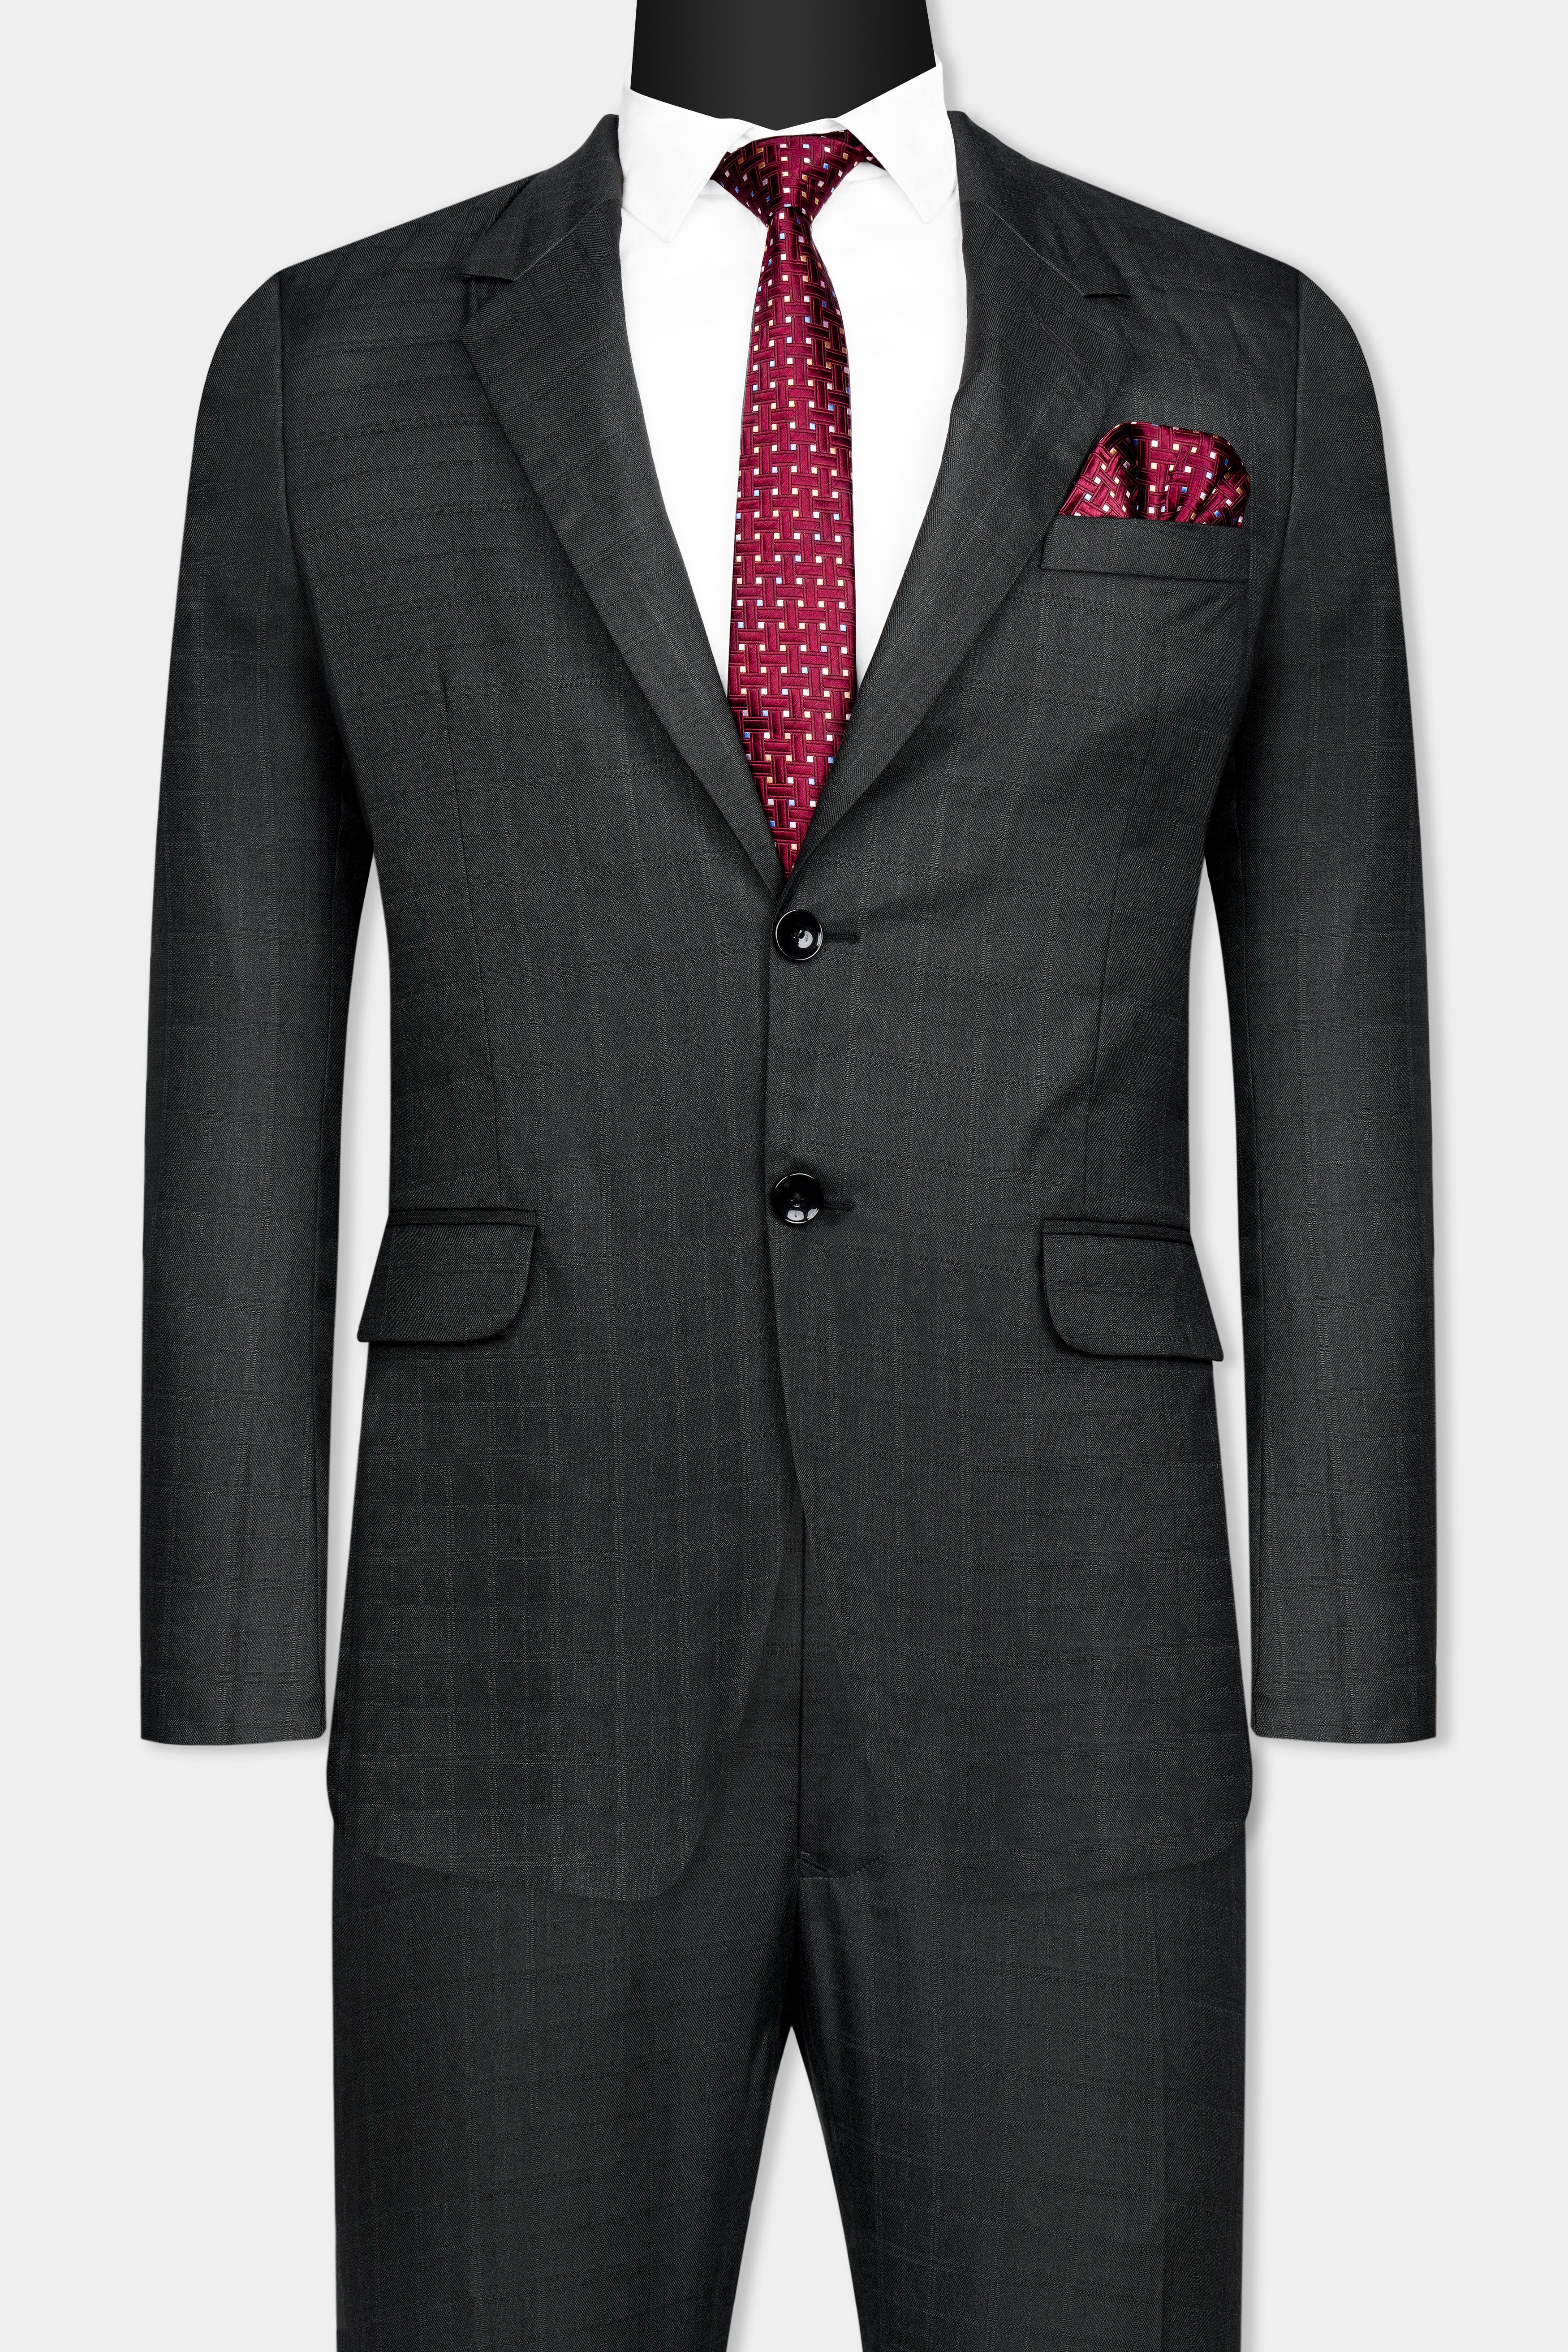 Abbey Gray Subtle Checkered Wool Rich Suit ST3053-SB-36, ST3053-SB-38, ST3053-SB-40, ST3053-SB-42, ST3053-SB-44, ST3053-SB-46, ST3053-SB-48, ST3053-SB-50, ST3053-SB-52, ST3053-SB-54, ST3053-SB-56, ST3053-SB-58, ST3053-SB-60